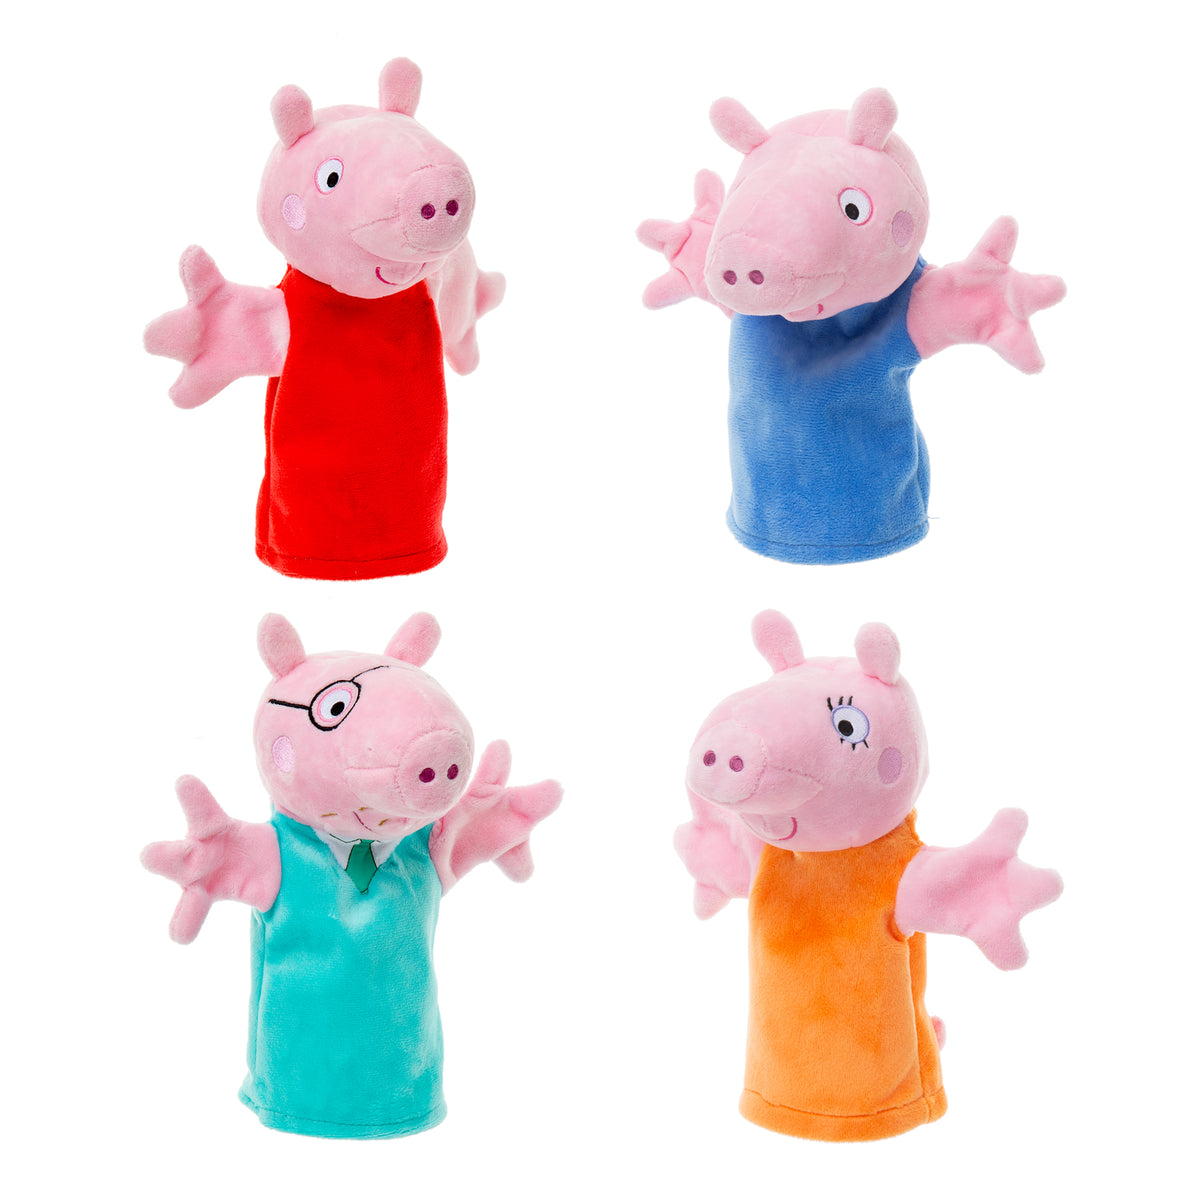 Puppets  Peppa Pig Theatre with 4 Puppets – TCG TOYS